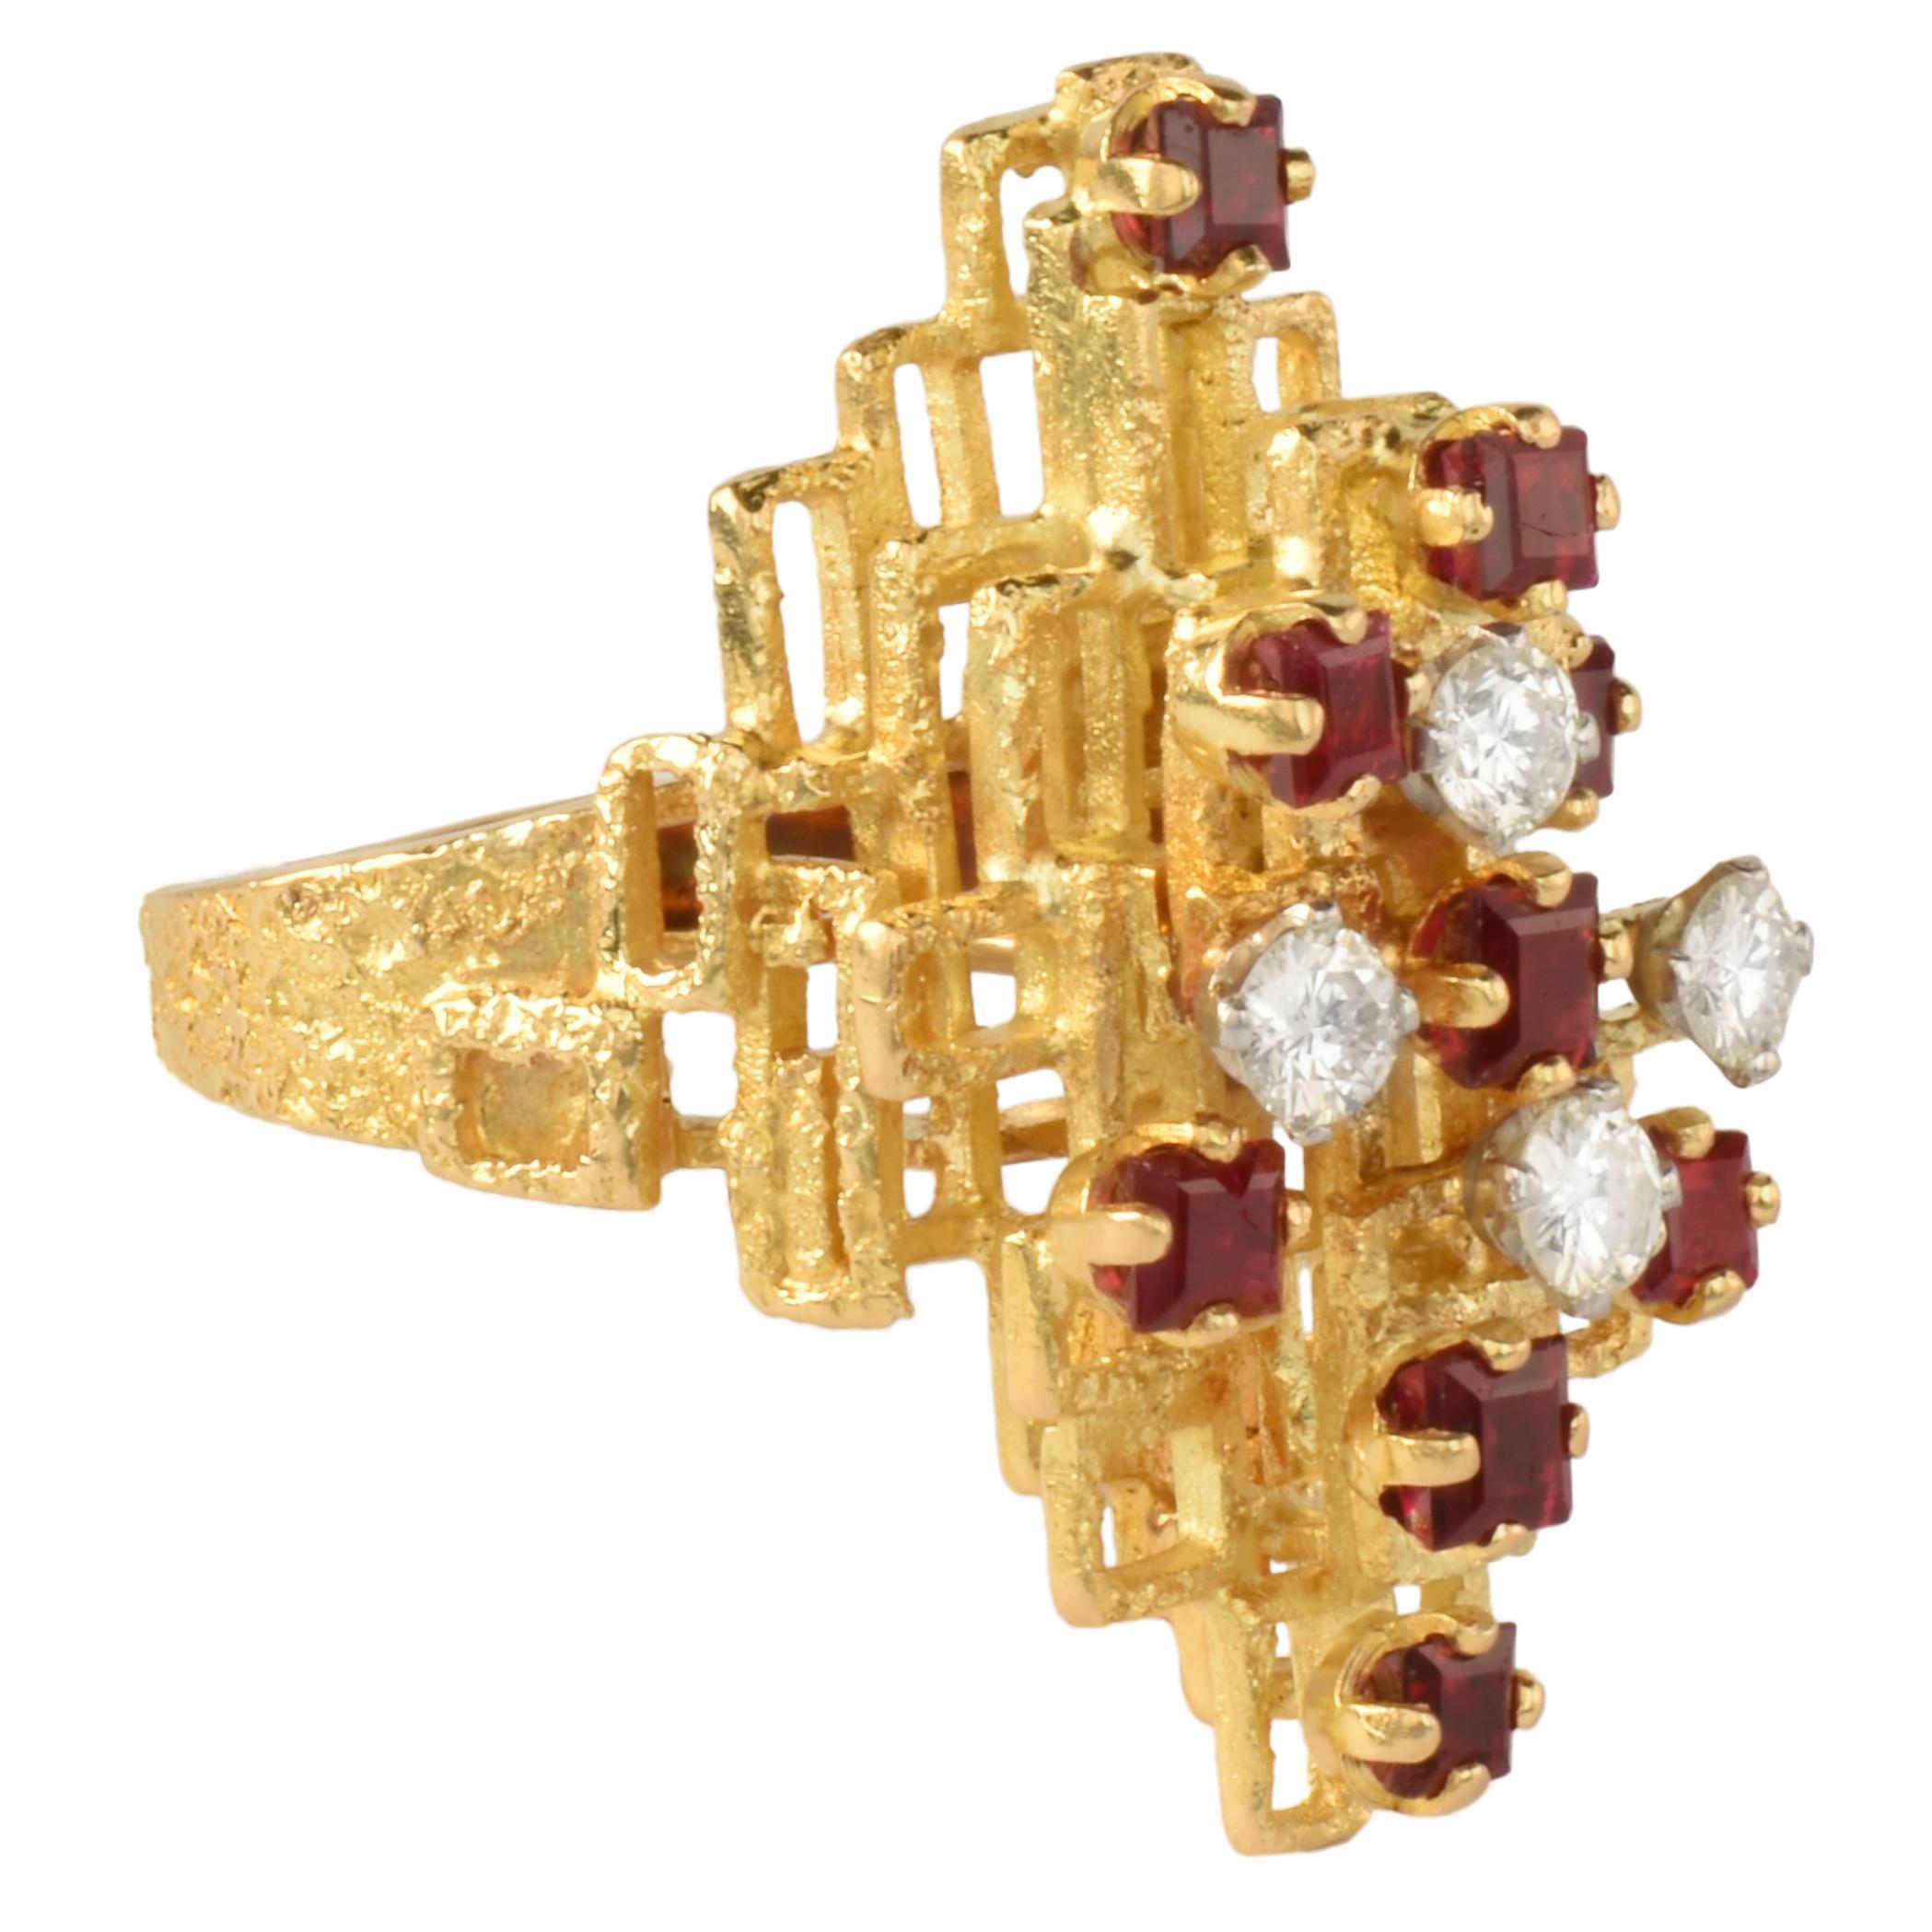 Modernist Vintage 18k Gold, Ruby & Diamond Ring Attributed to George Weil